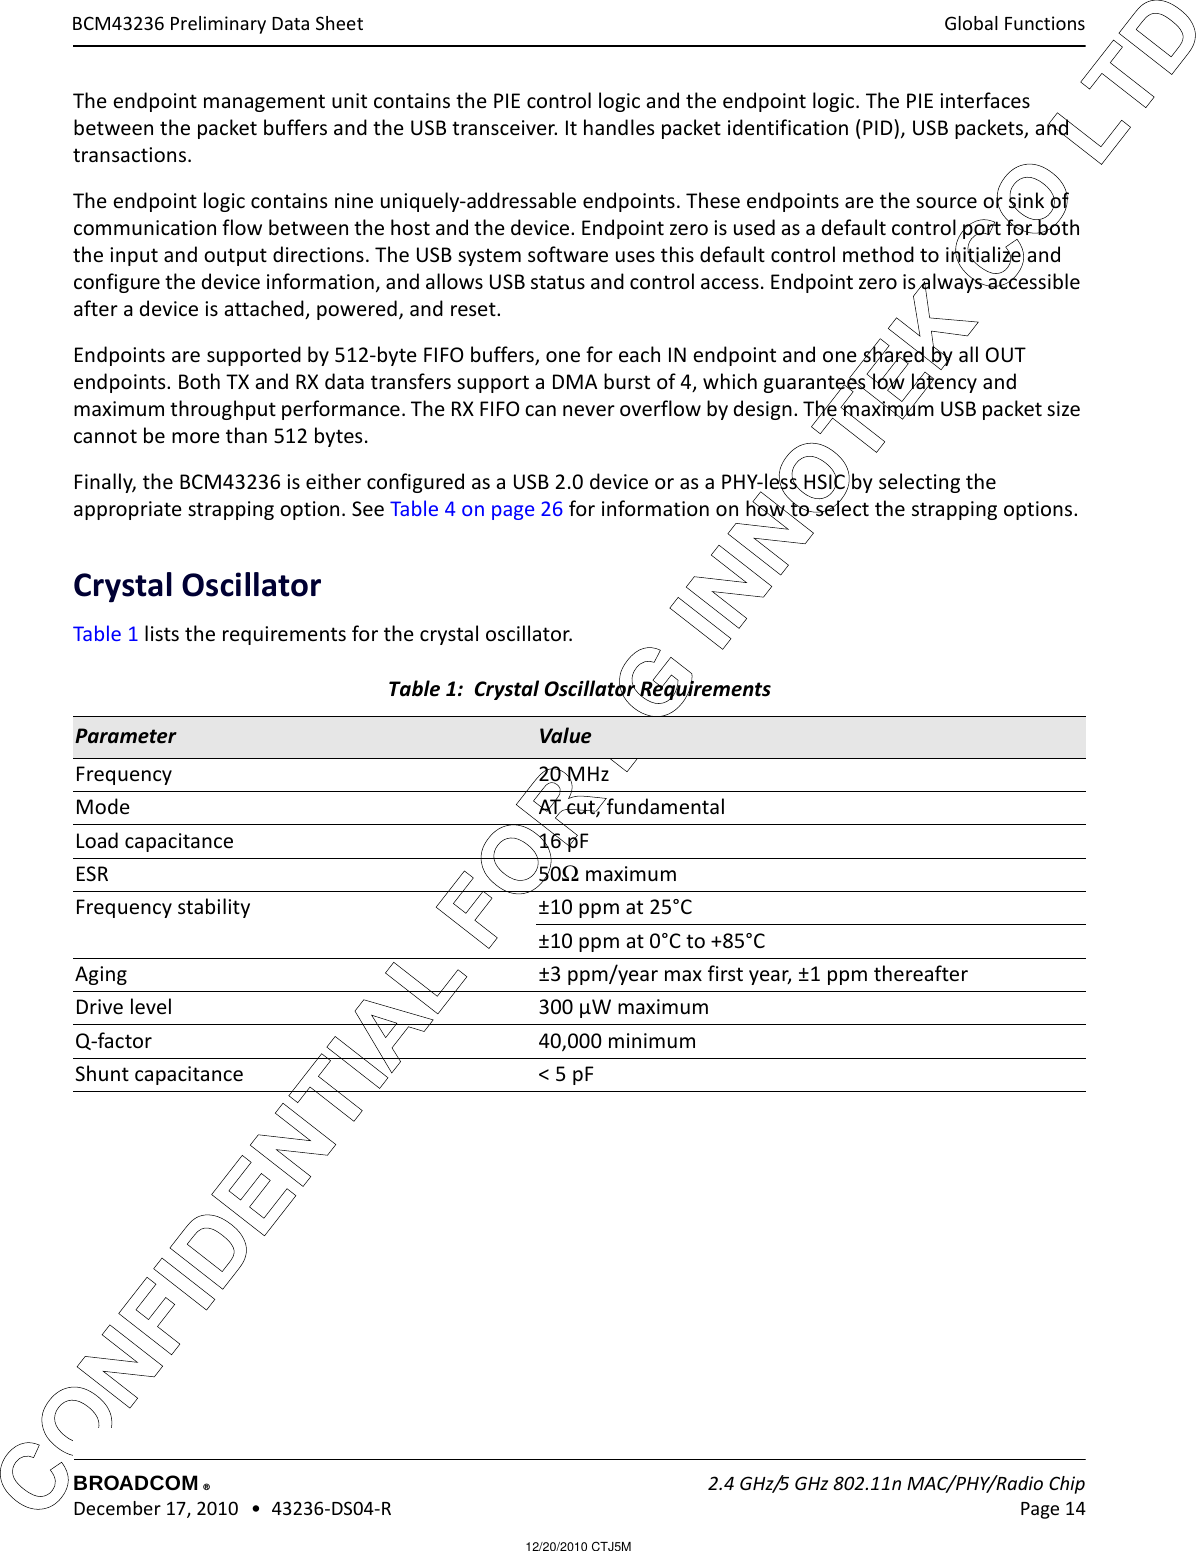 12/20/2010 CTJ5MCONFIDENTIAL FOR LG INNOTEK CO LTD Global FunctionsBROADCOM    2.4 GHz/5 GHz 802.11n MAC/PHY/Radio Chip December 17, 2010   •  43236-DS04-R Page 14®BCM43236 Preliminary Data SheetThe endpoint management unit contains the PIE control logic and the endpoint logic. The PIE interfaces between the packet buffers and the USB transceiver. It handles packet identification (PID), USB packets, and transactions.The endpoint logic contains nine uniquely-addressable endpoints. These endpoints are the source or sink of communication flow between the host and the device. Endpoint zero is used as a default control port for both the input and output directions. The USB system software uses this default control method to initialize and configure the device information, and allows USB status and control access. Endpoint zero is always accessible after a device is attached, powered, and reset.Endpoints are supported by 512-byte FIFO buffers, one for each IN endpoint and one shared by all OUT endpoints. Both TX and RX data transfers support a DMA burst of 4, which guarantees low latency and maximum throughput performance. The RX FIFO can never overflow by design. The maximum USB packet size cannot be more than 512 bytes. Finally, the BCM43236 is either configured as a USB 2.0 device or as a PHY-less HSIC by selecting the appropriate strapping option. See Table 4 on page 26 for information on how to select the strapping options.Crystal OscillatorTable 1 lists the requirements for the crystal oscillator.Table 1:  Crystal Oscillator Requirements Parameter ValueFrequency 20 MHzMode AT cut, fundamentalLoad capacitance 16 pFESR 50Ω maximumFrequency stability ±10 ppm at 25°C±10 ppm at 0°C to +85°CAging ±3 ppm/year max first year, ±1 ppm thereafterDrive level 300 µW maximumQ-factor 40,000 minimumShunt capacitance &lt; 5 pF